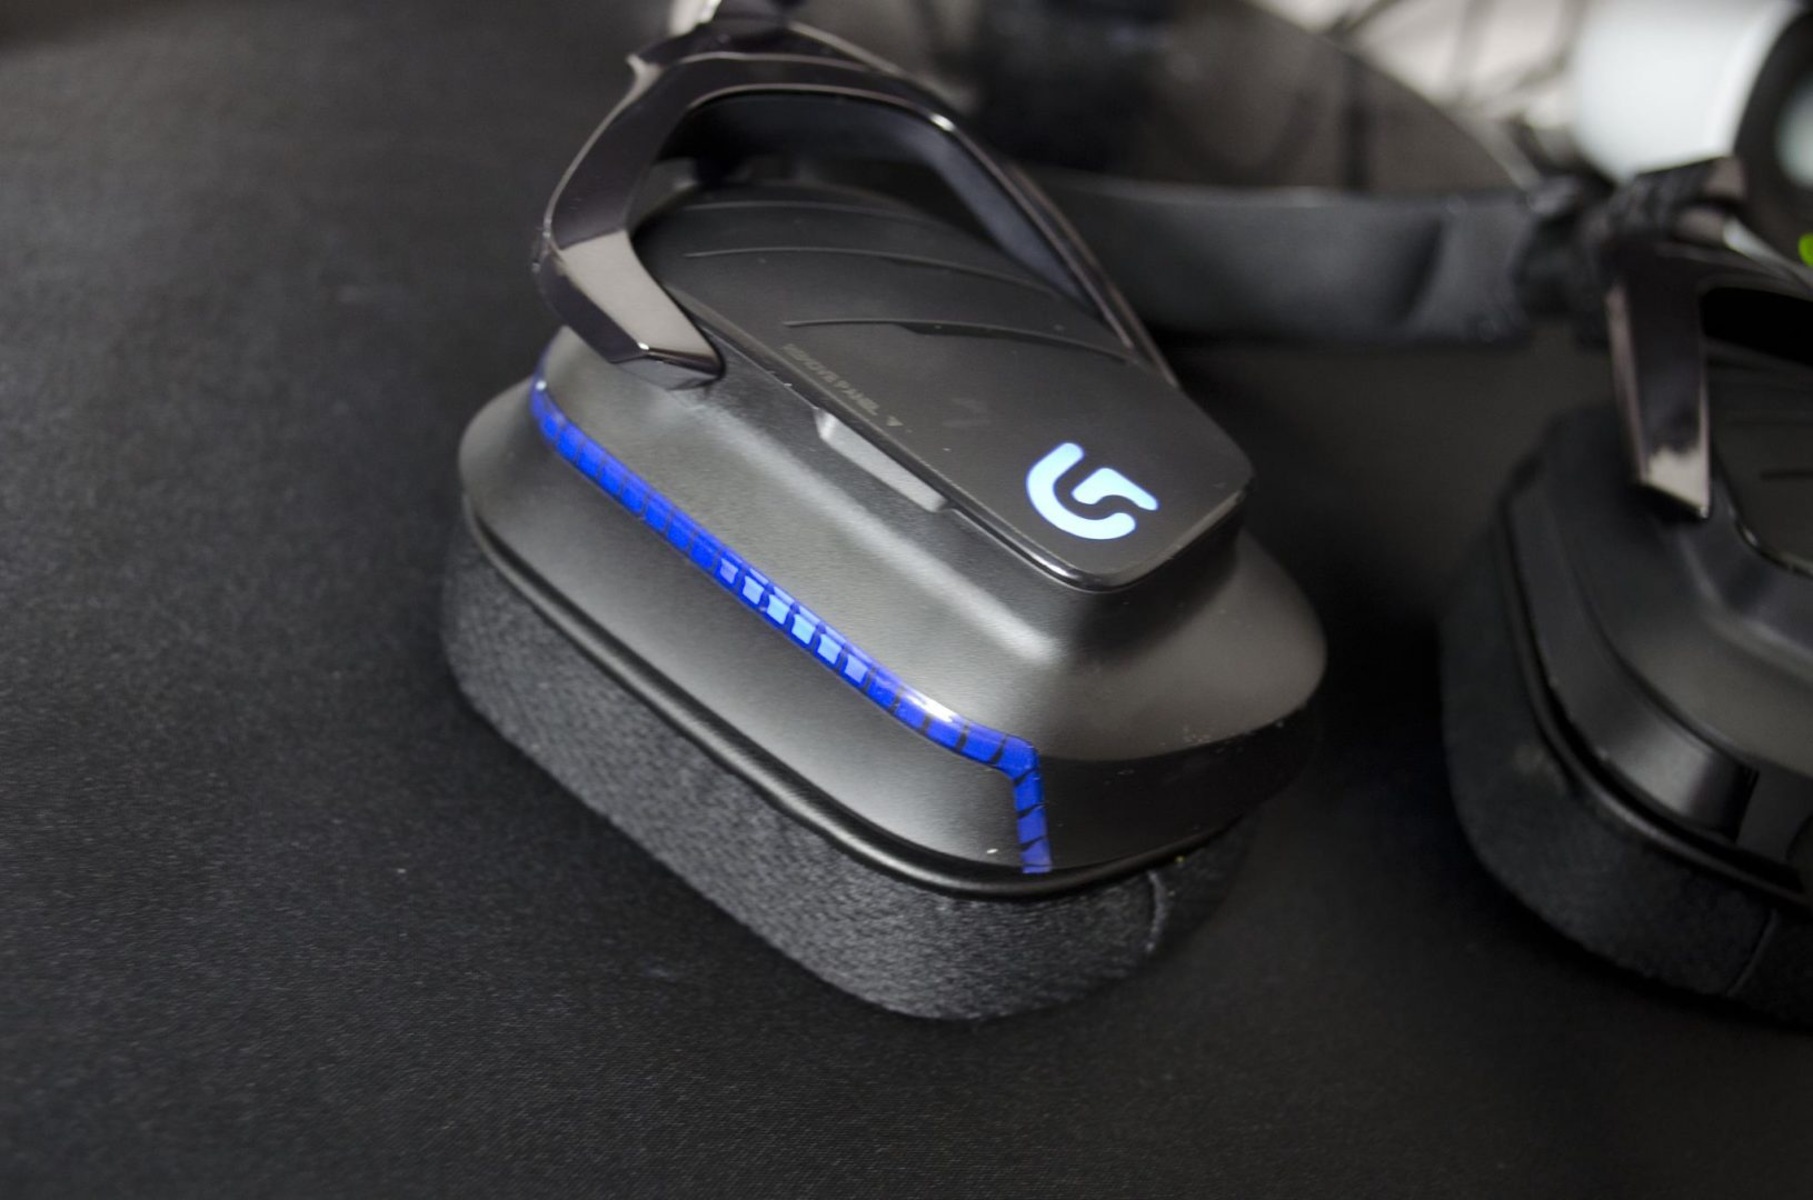 How To Edit RGB Lights On Logitech Gaming Headset G633